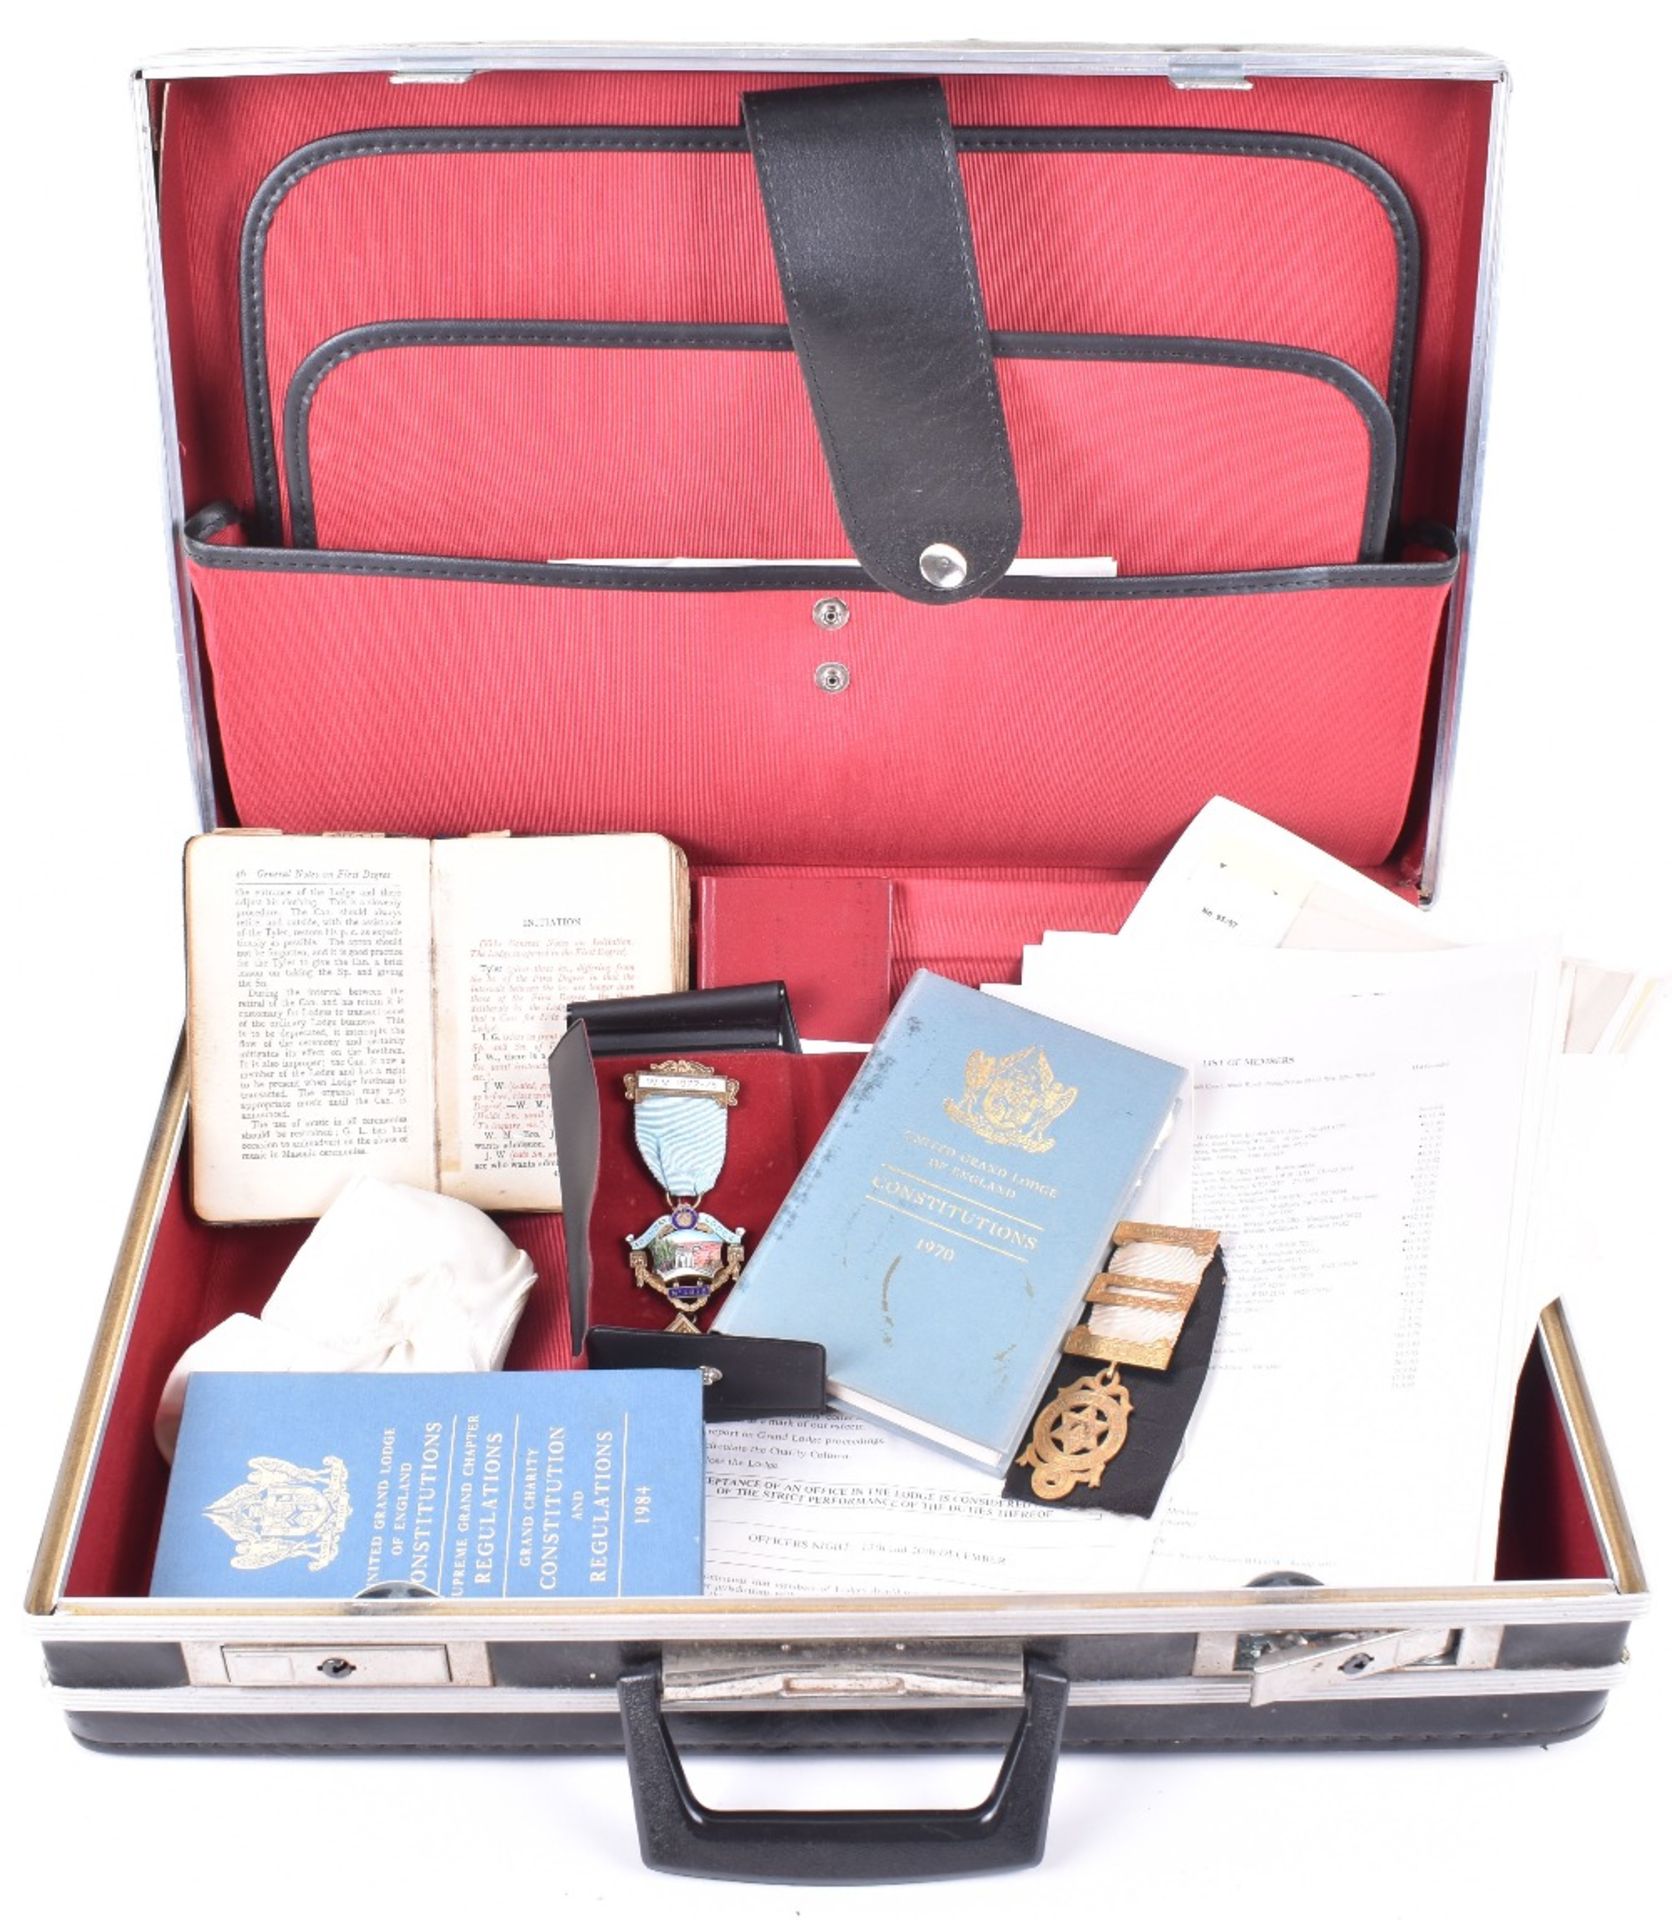 A mixed lot of Masonic items including a silver and enamel medal for Archway Lodge 1977-78